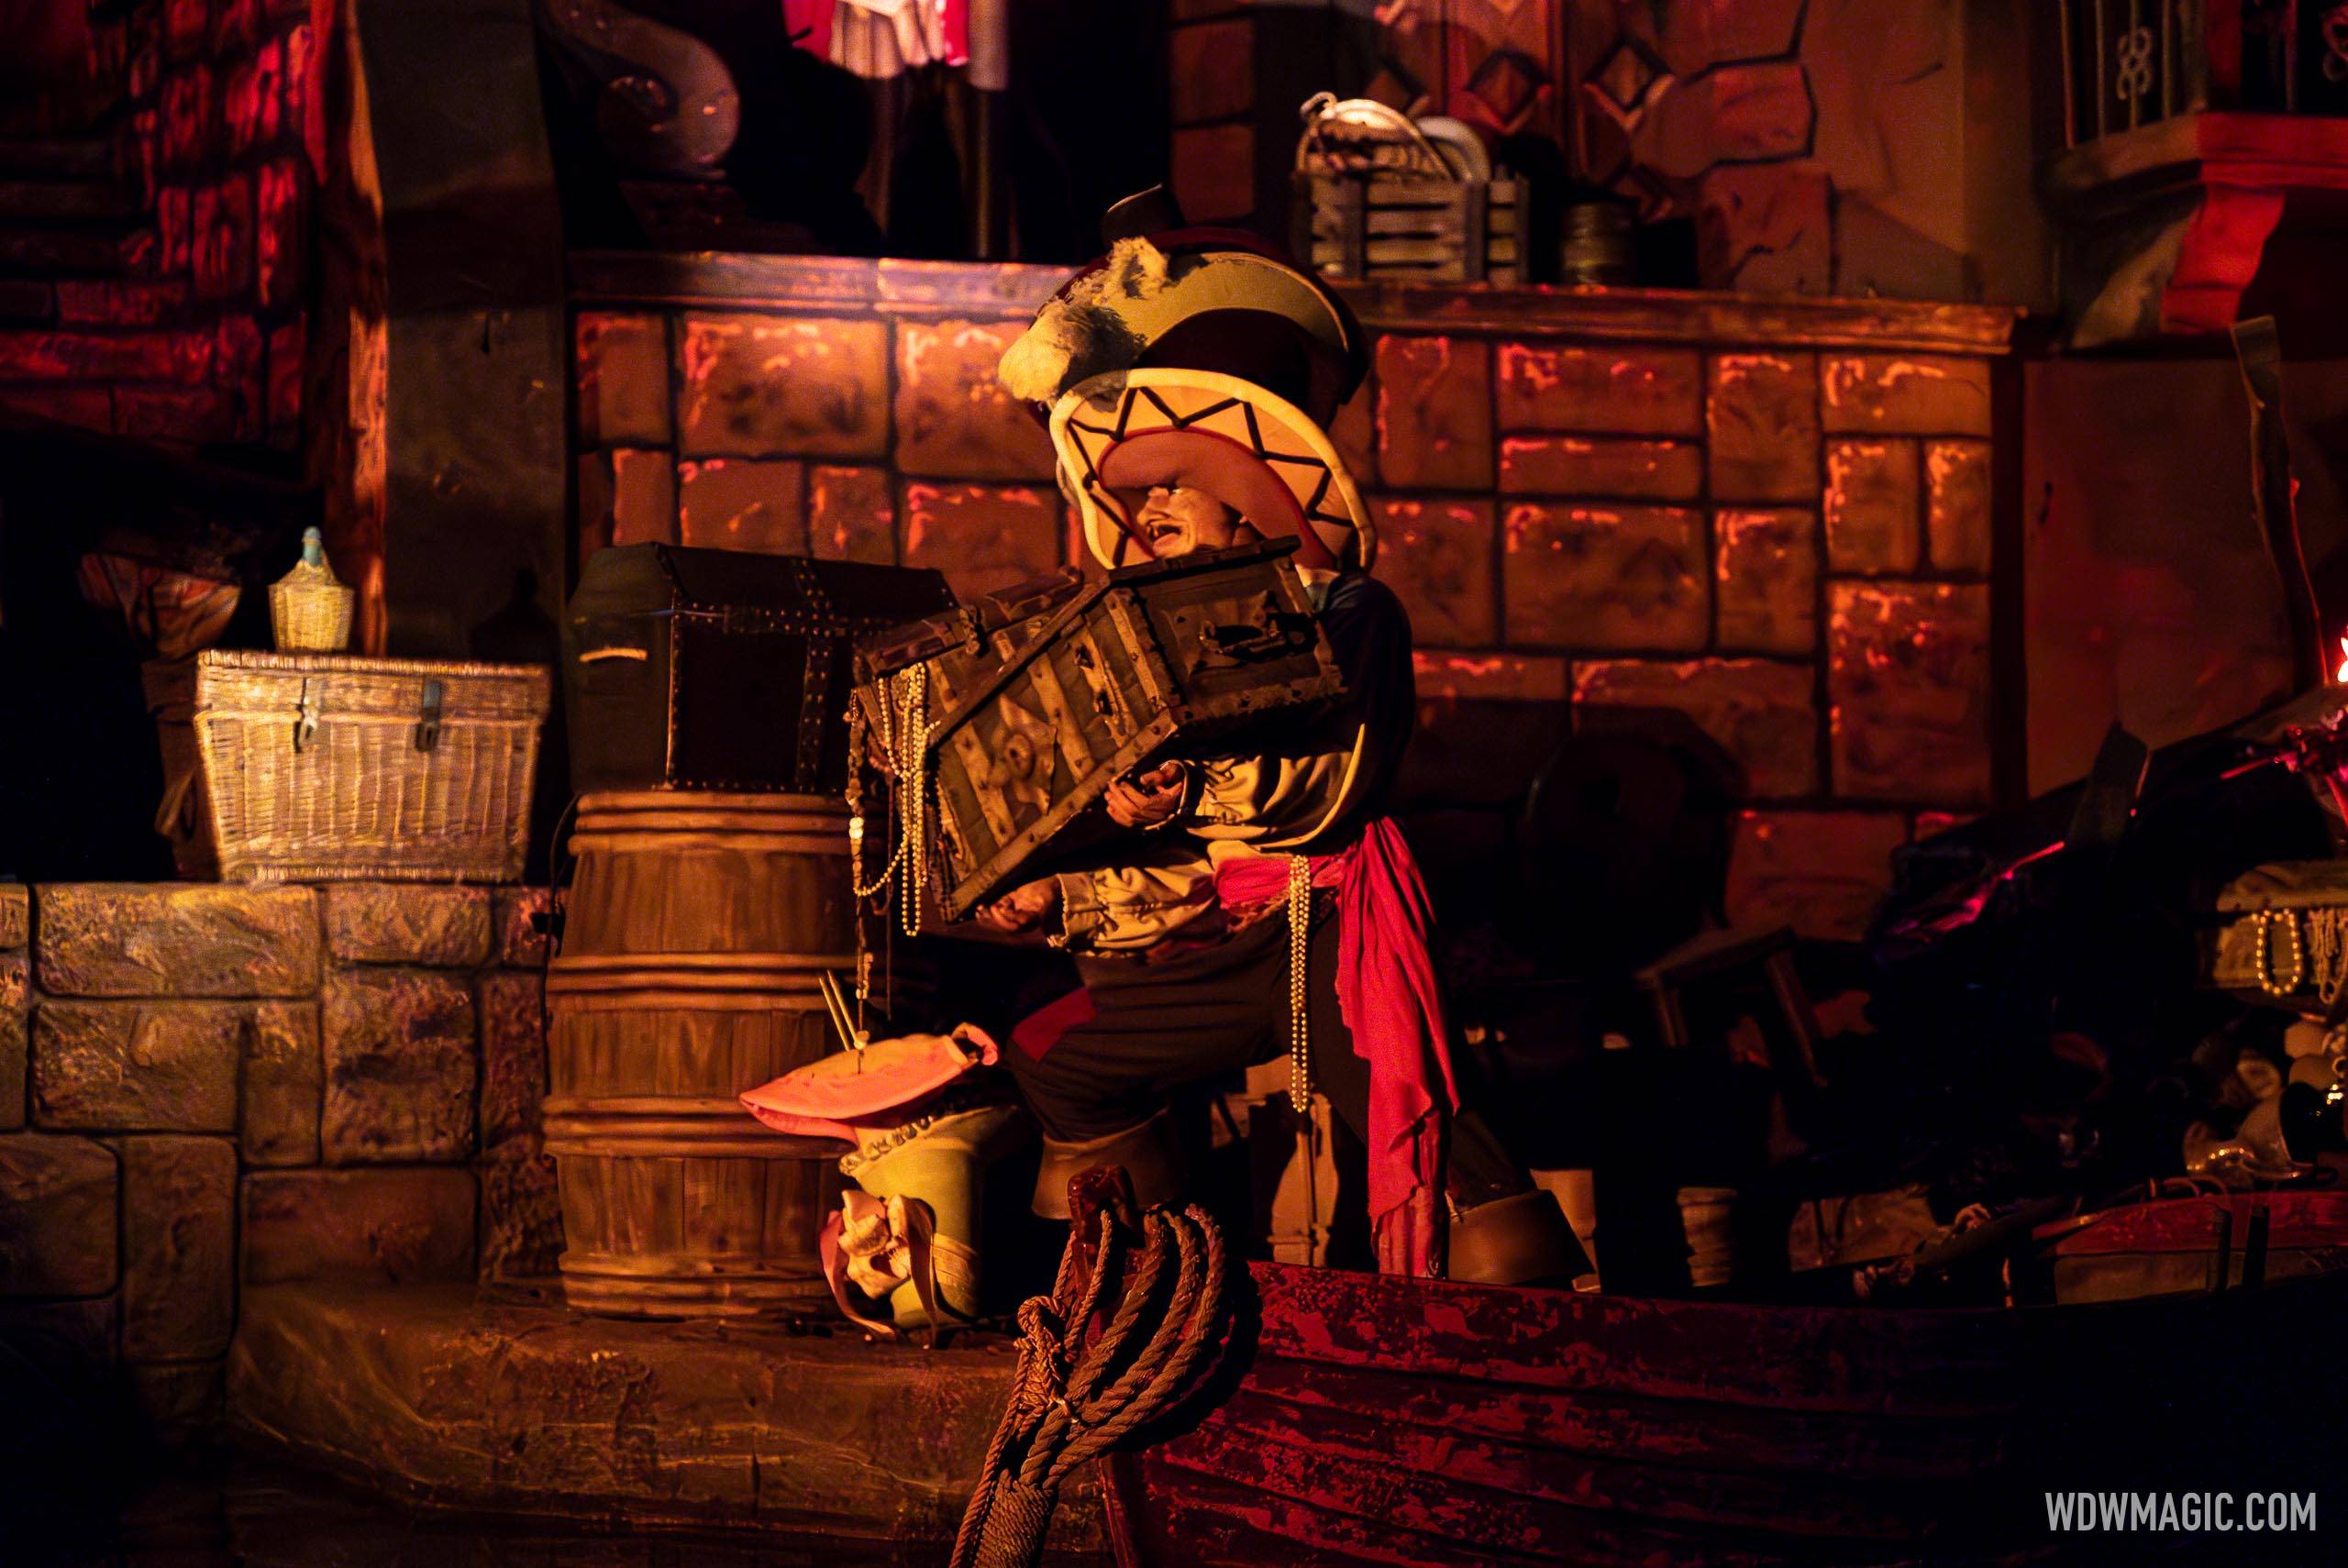 Pirates of the Caribbean reopening report